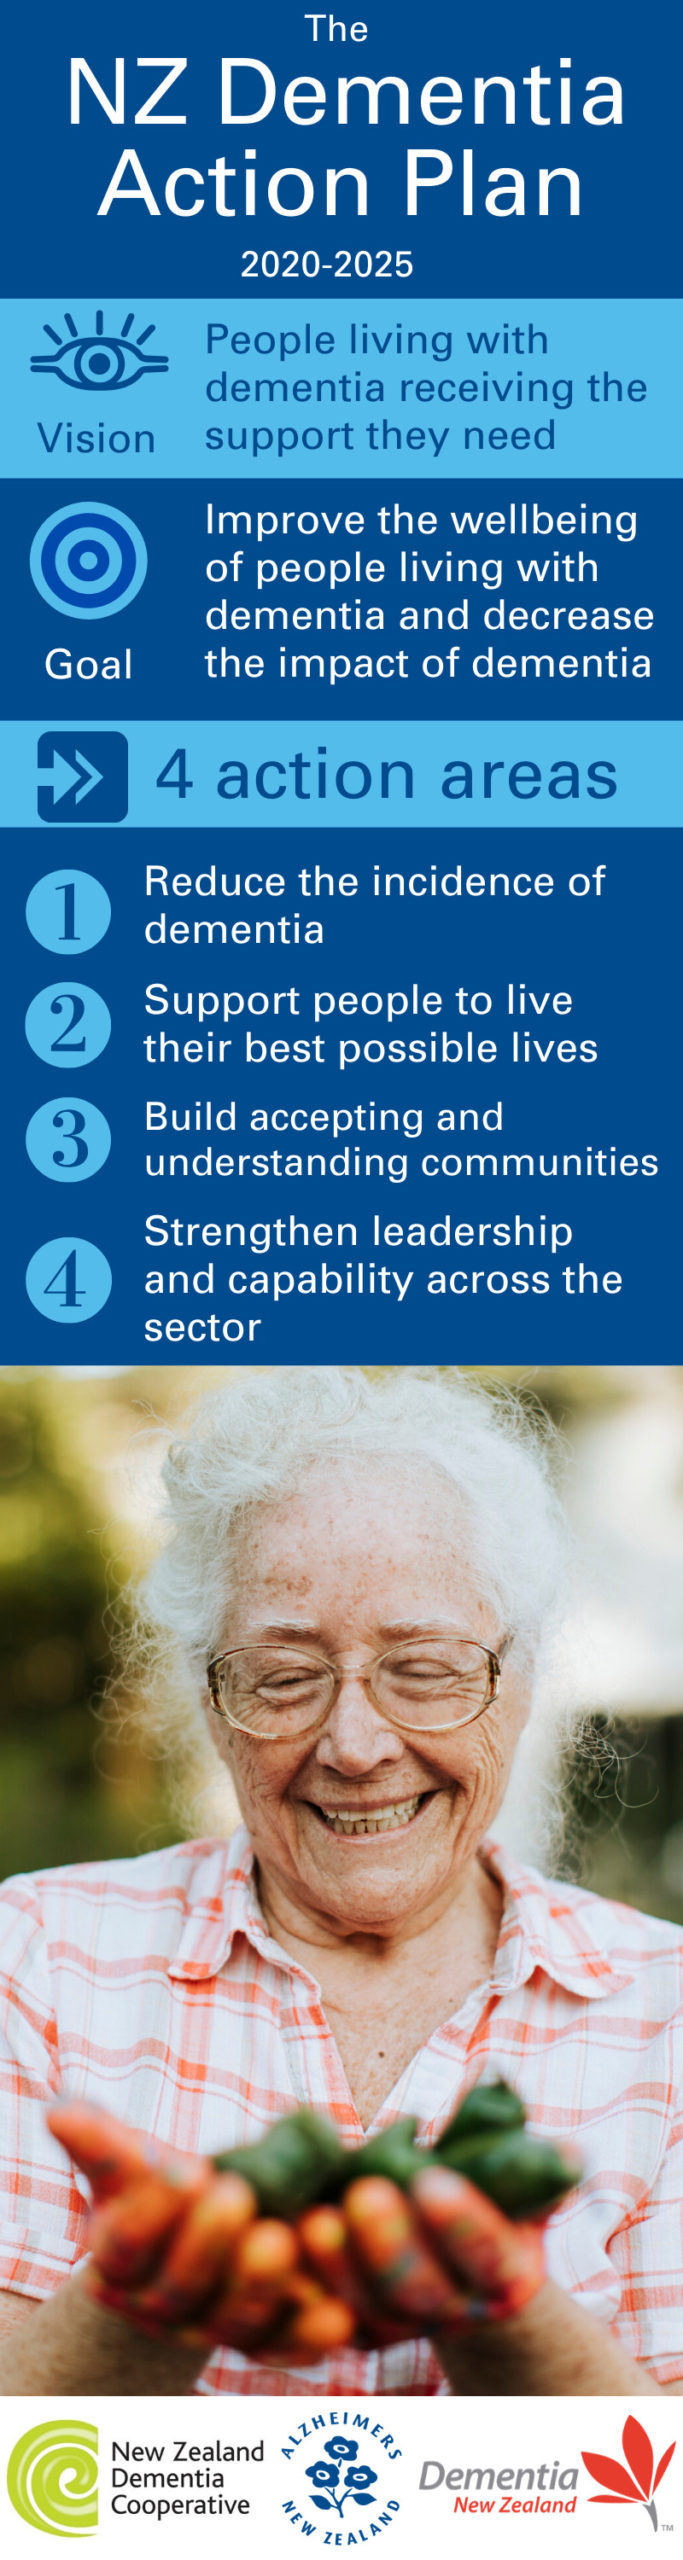 NZ Dementia Action Plan. 
Vision, goal and 4 action areas
